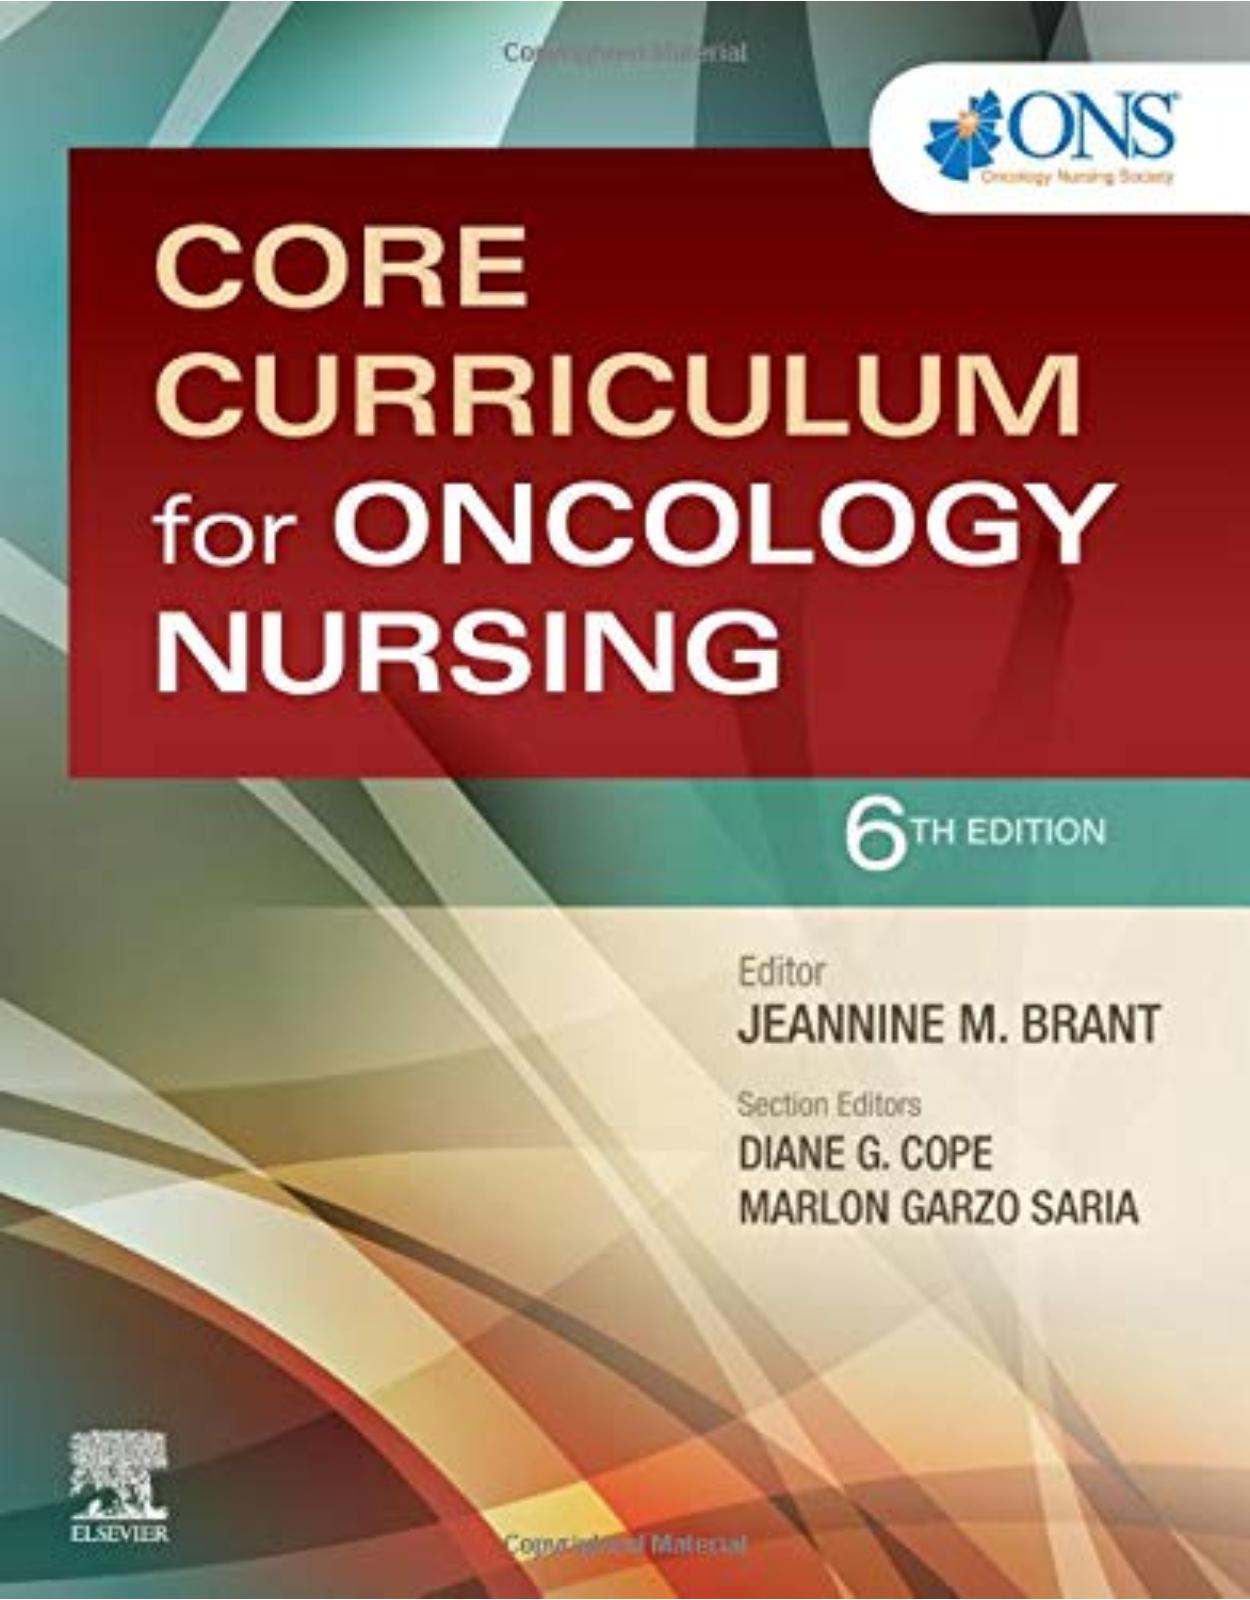 Core Curriculum for Oncology Nursing, 6th Edition